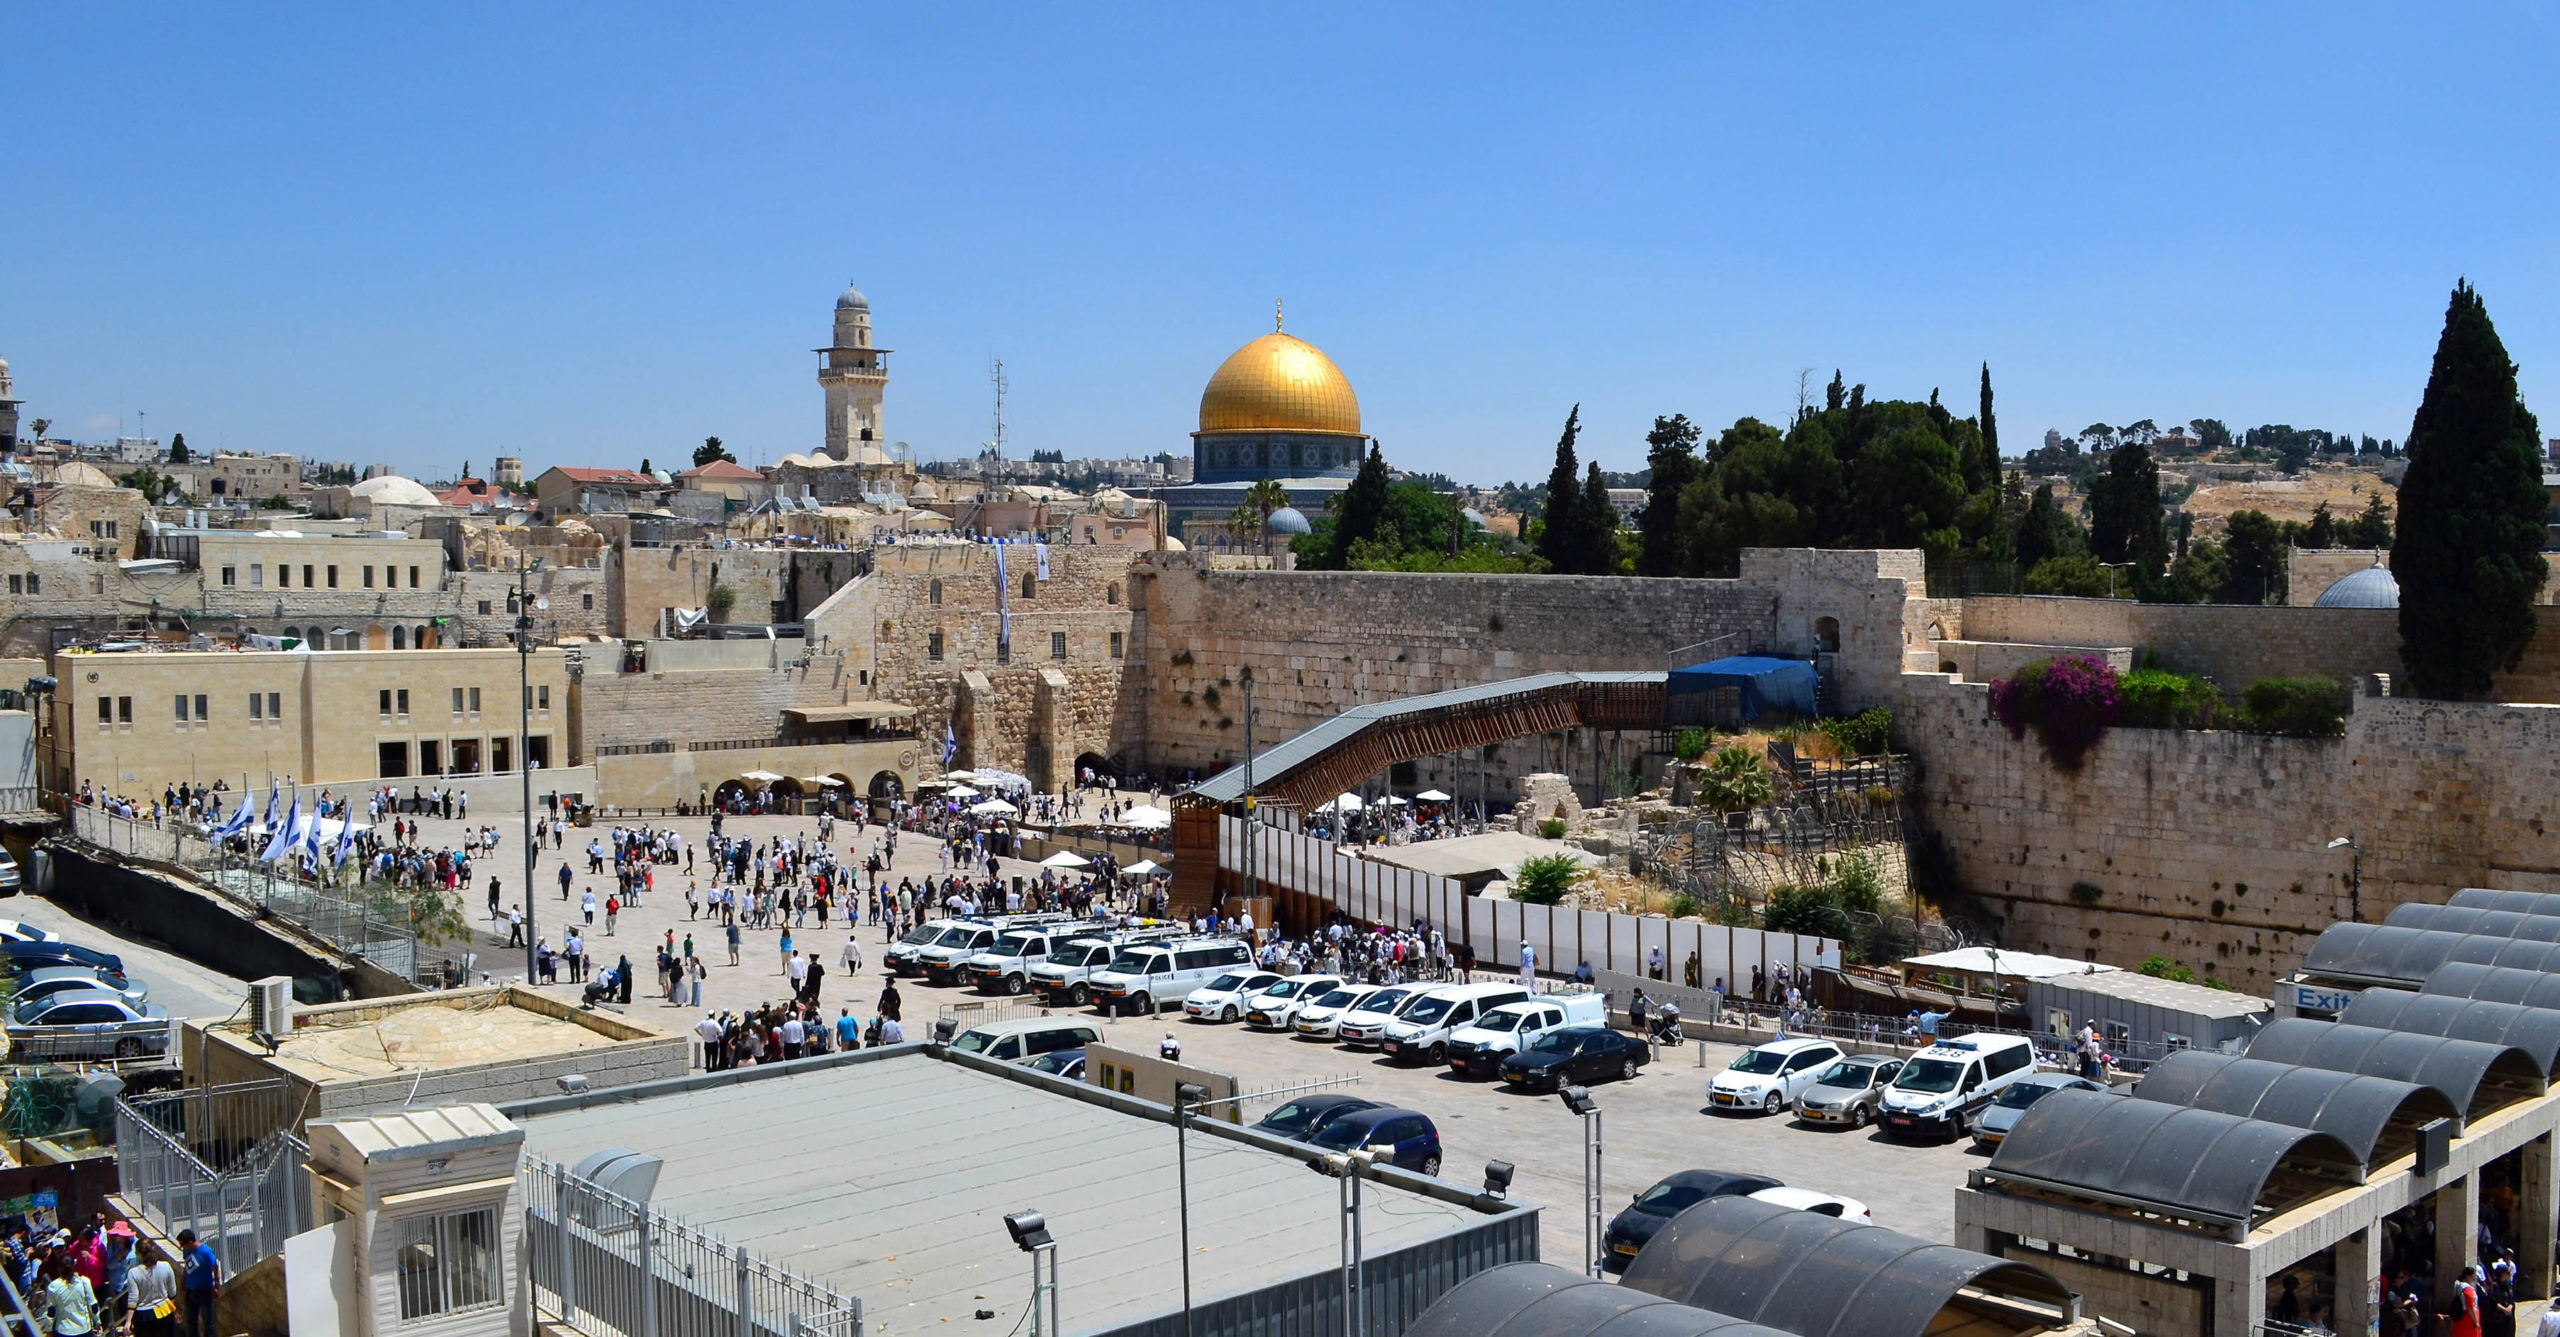 View of the Western Wall and the Dome of the Rock, Haram al-Sharif, the Temple Mount, Jerusalem (photo: Larry Koester CC BY 2.0)